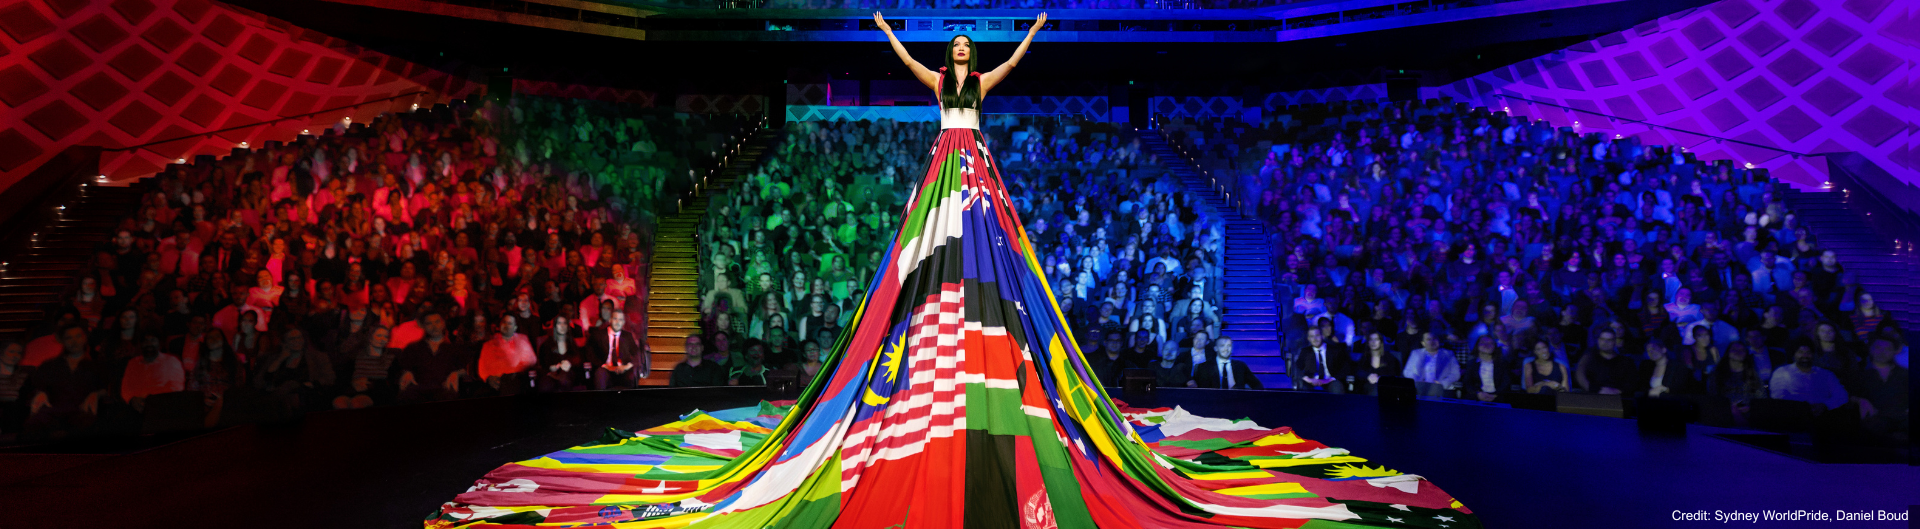 Amsterdam Dress pictured in Darling Harbour Theatre, ICC Sydney.